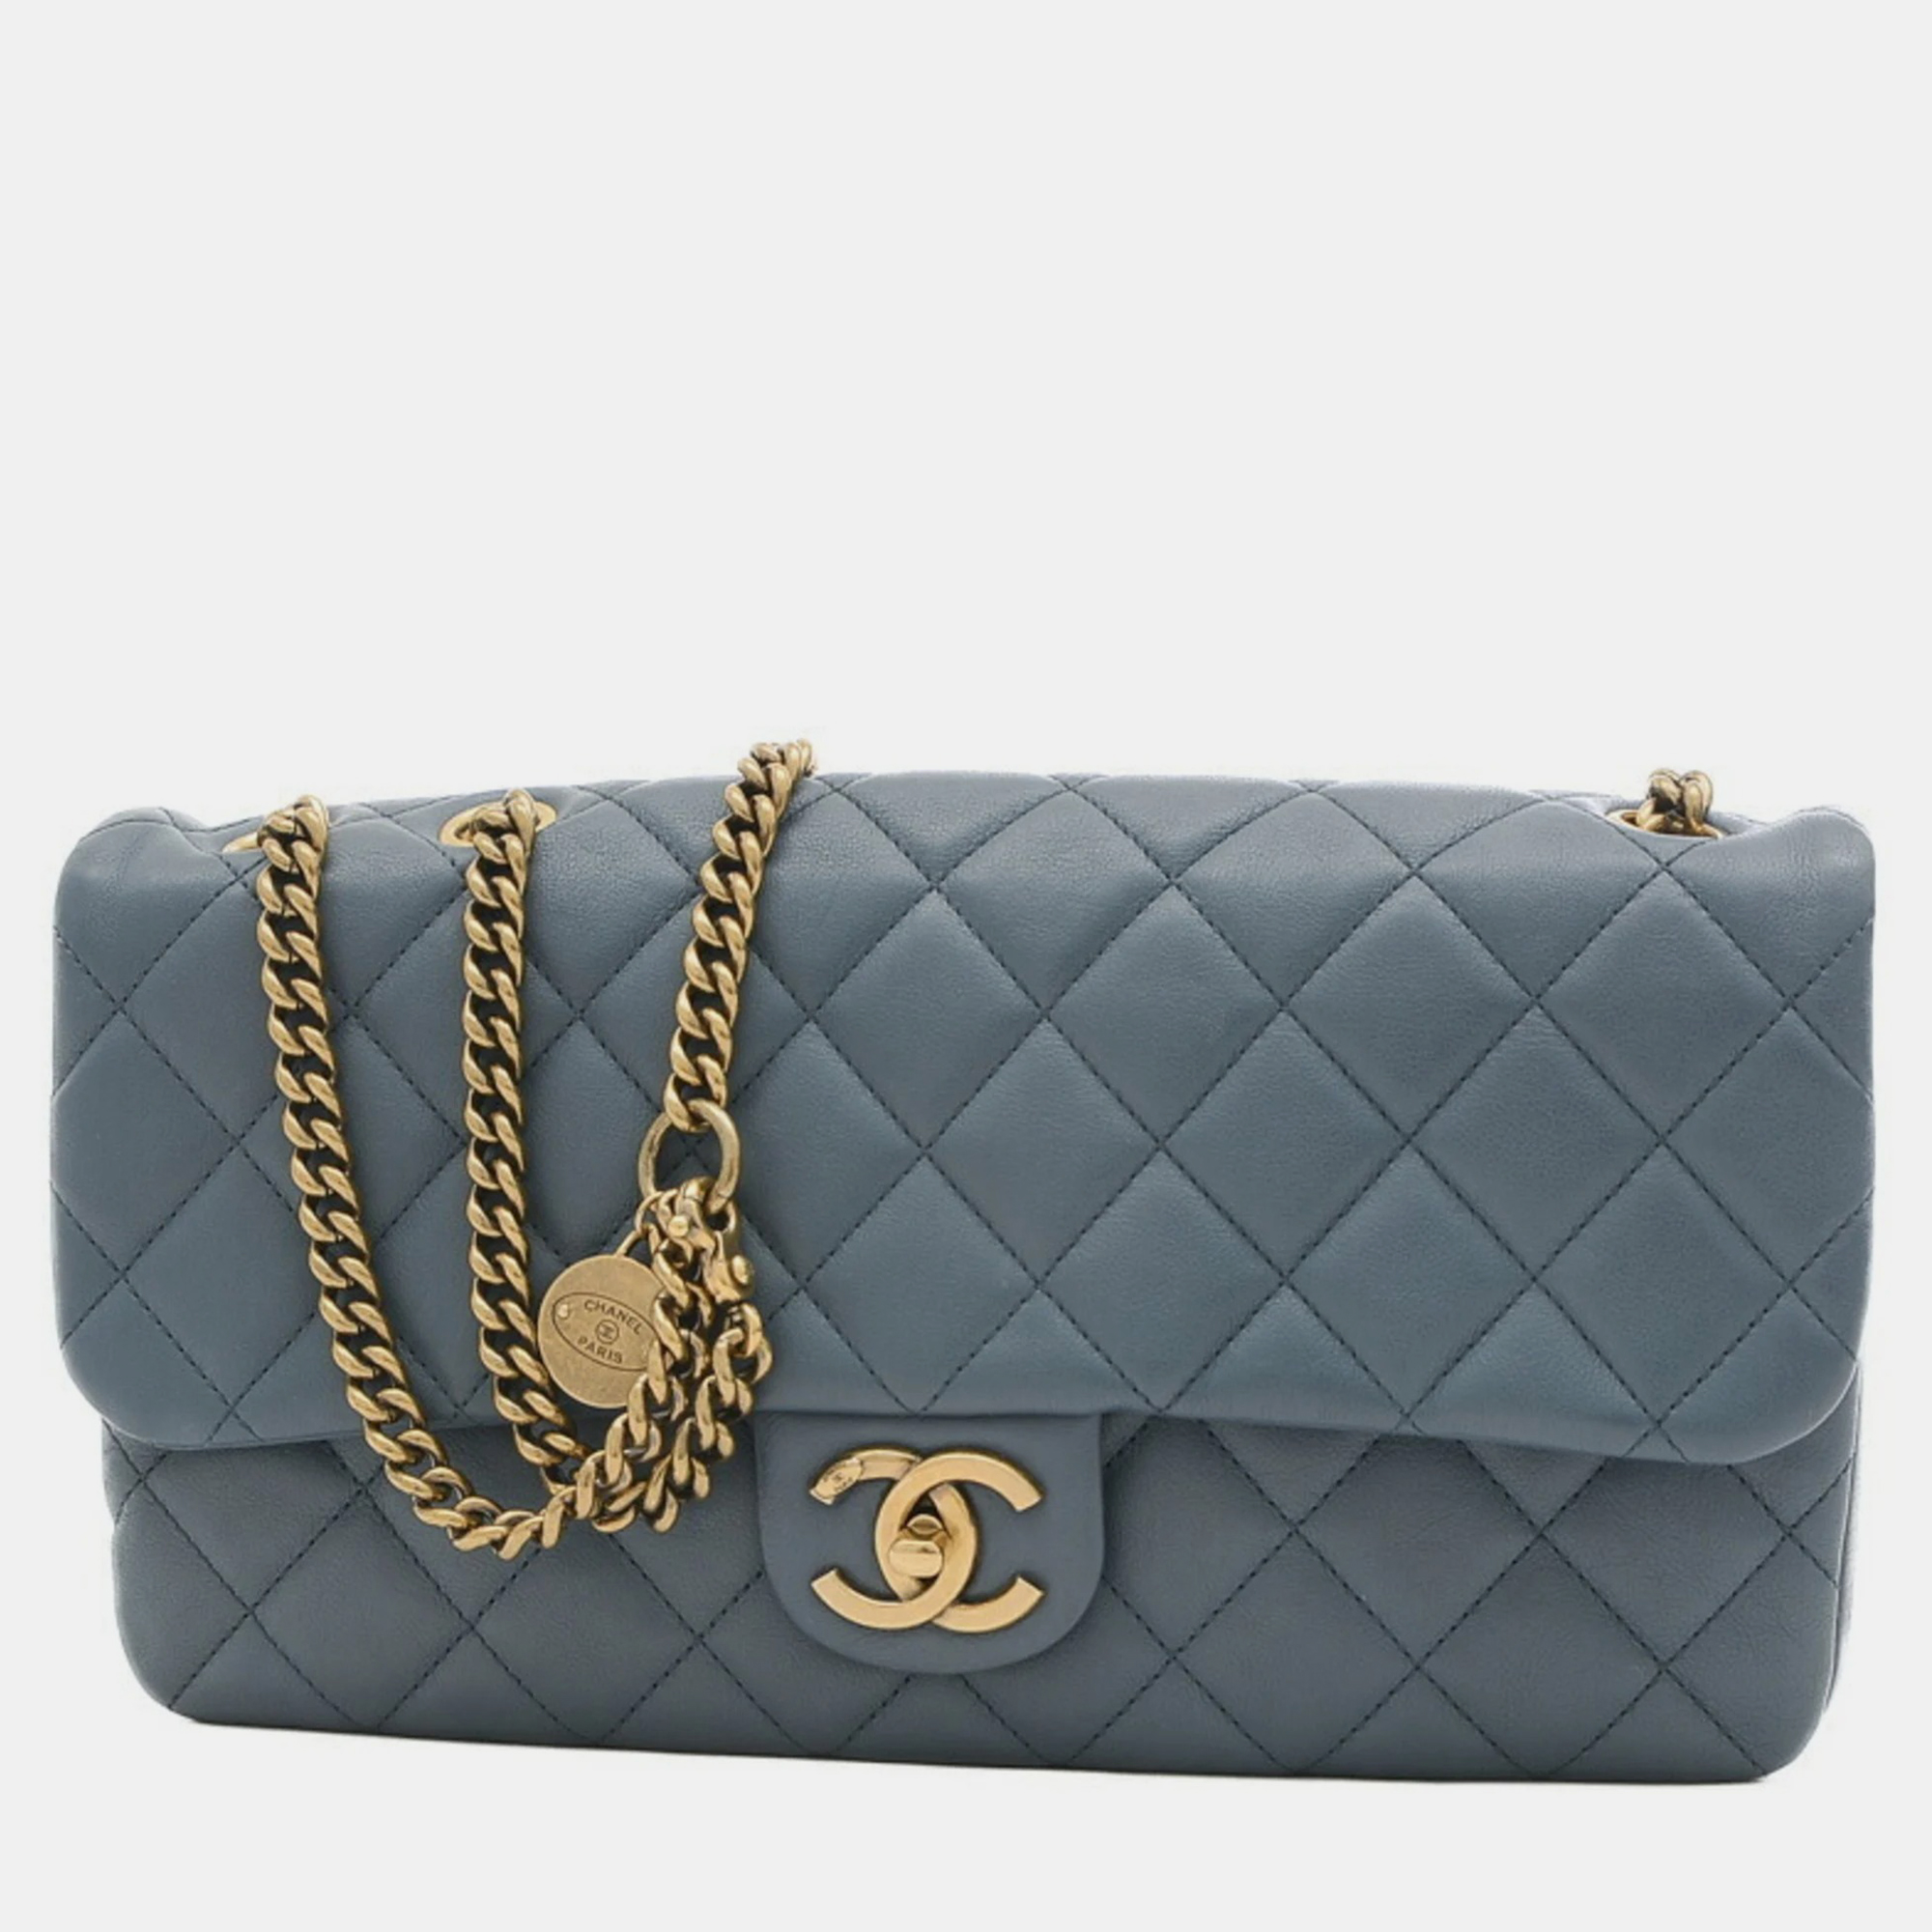 Pre-owned Chanel Leather Blue Matelasse Coin Charm Chain Shoulder Bag